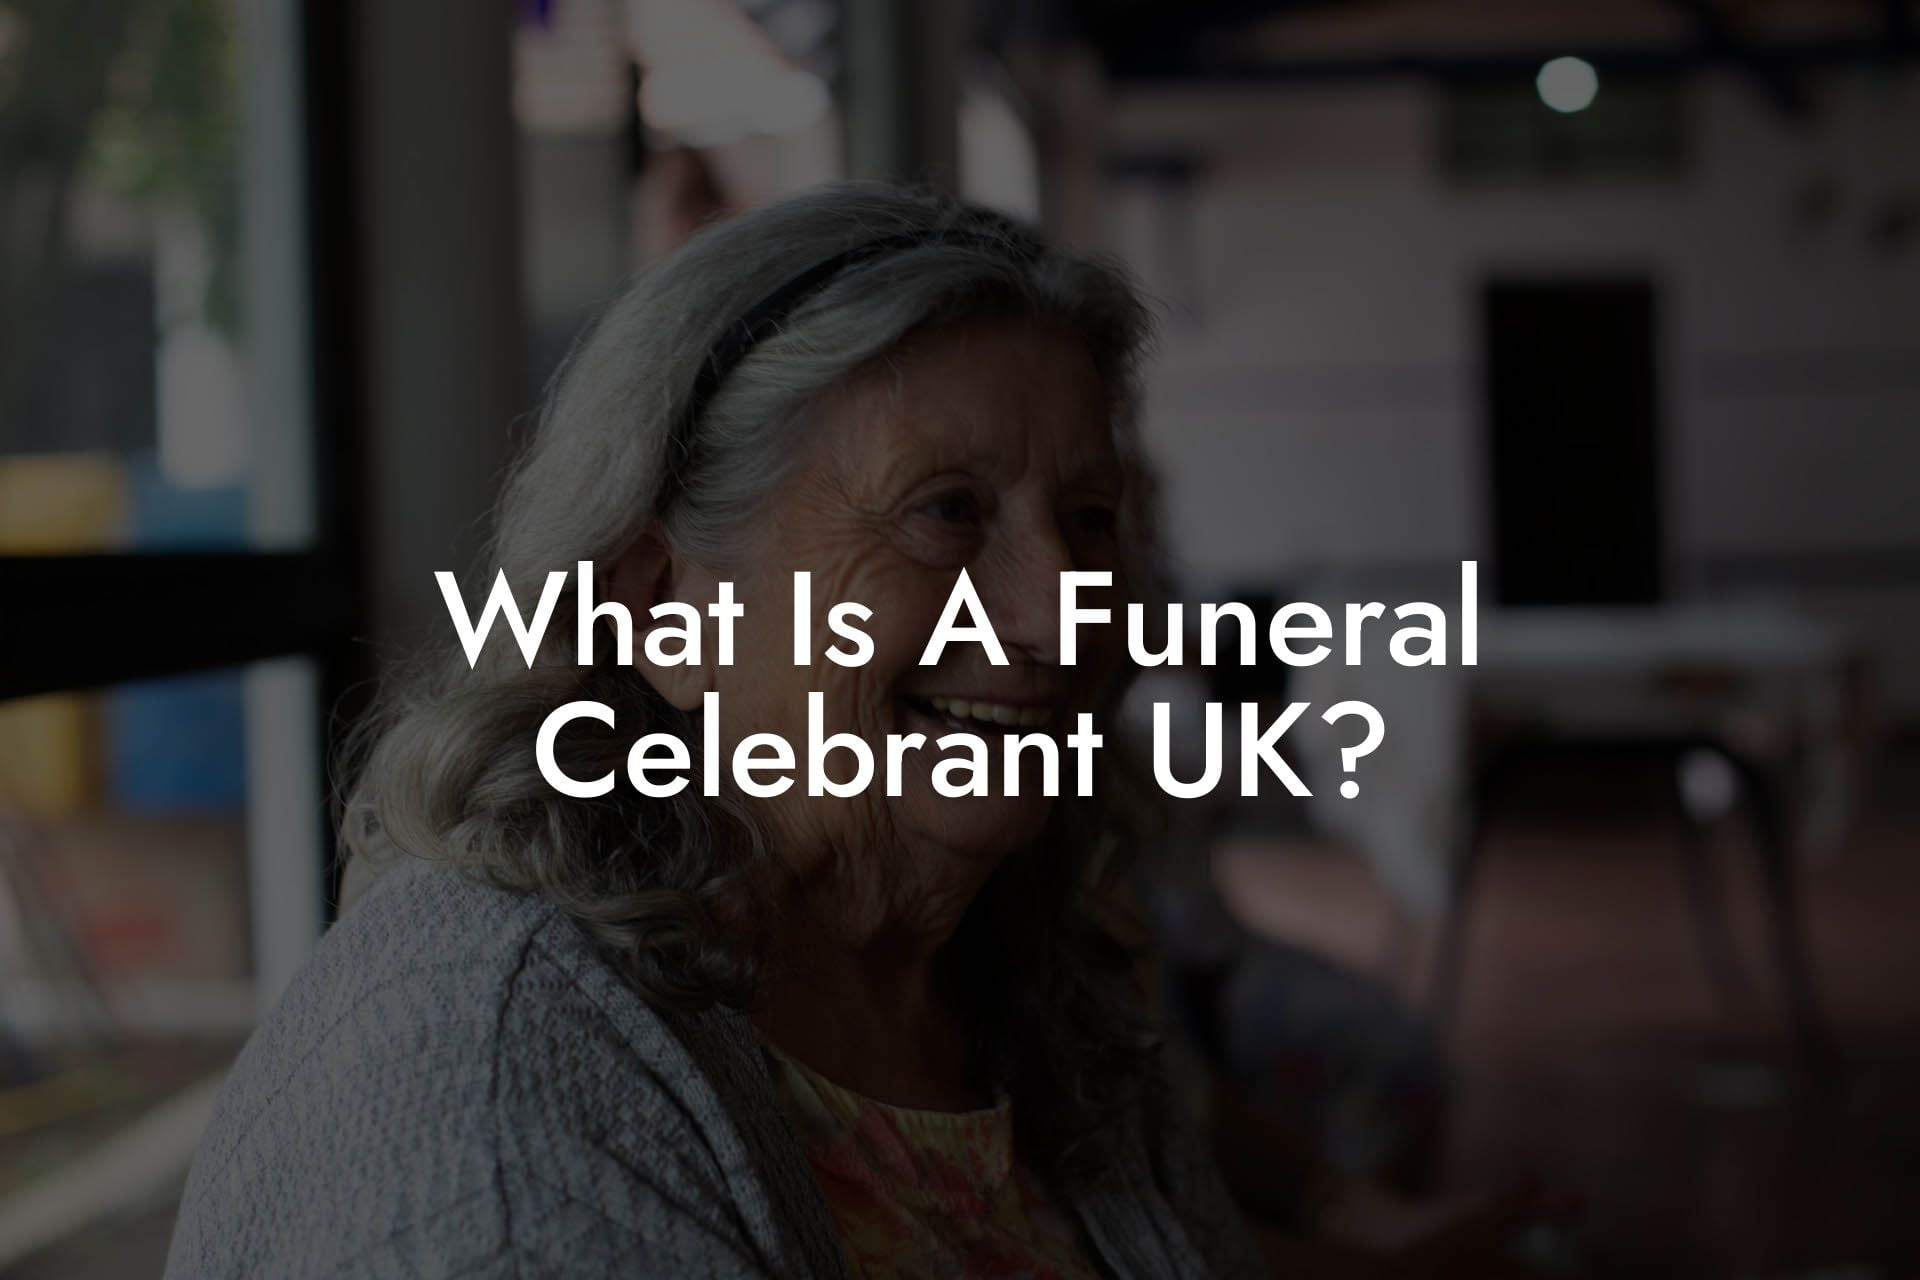 What Is A Funeral Celebrant UK?